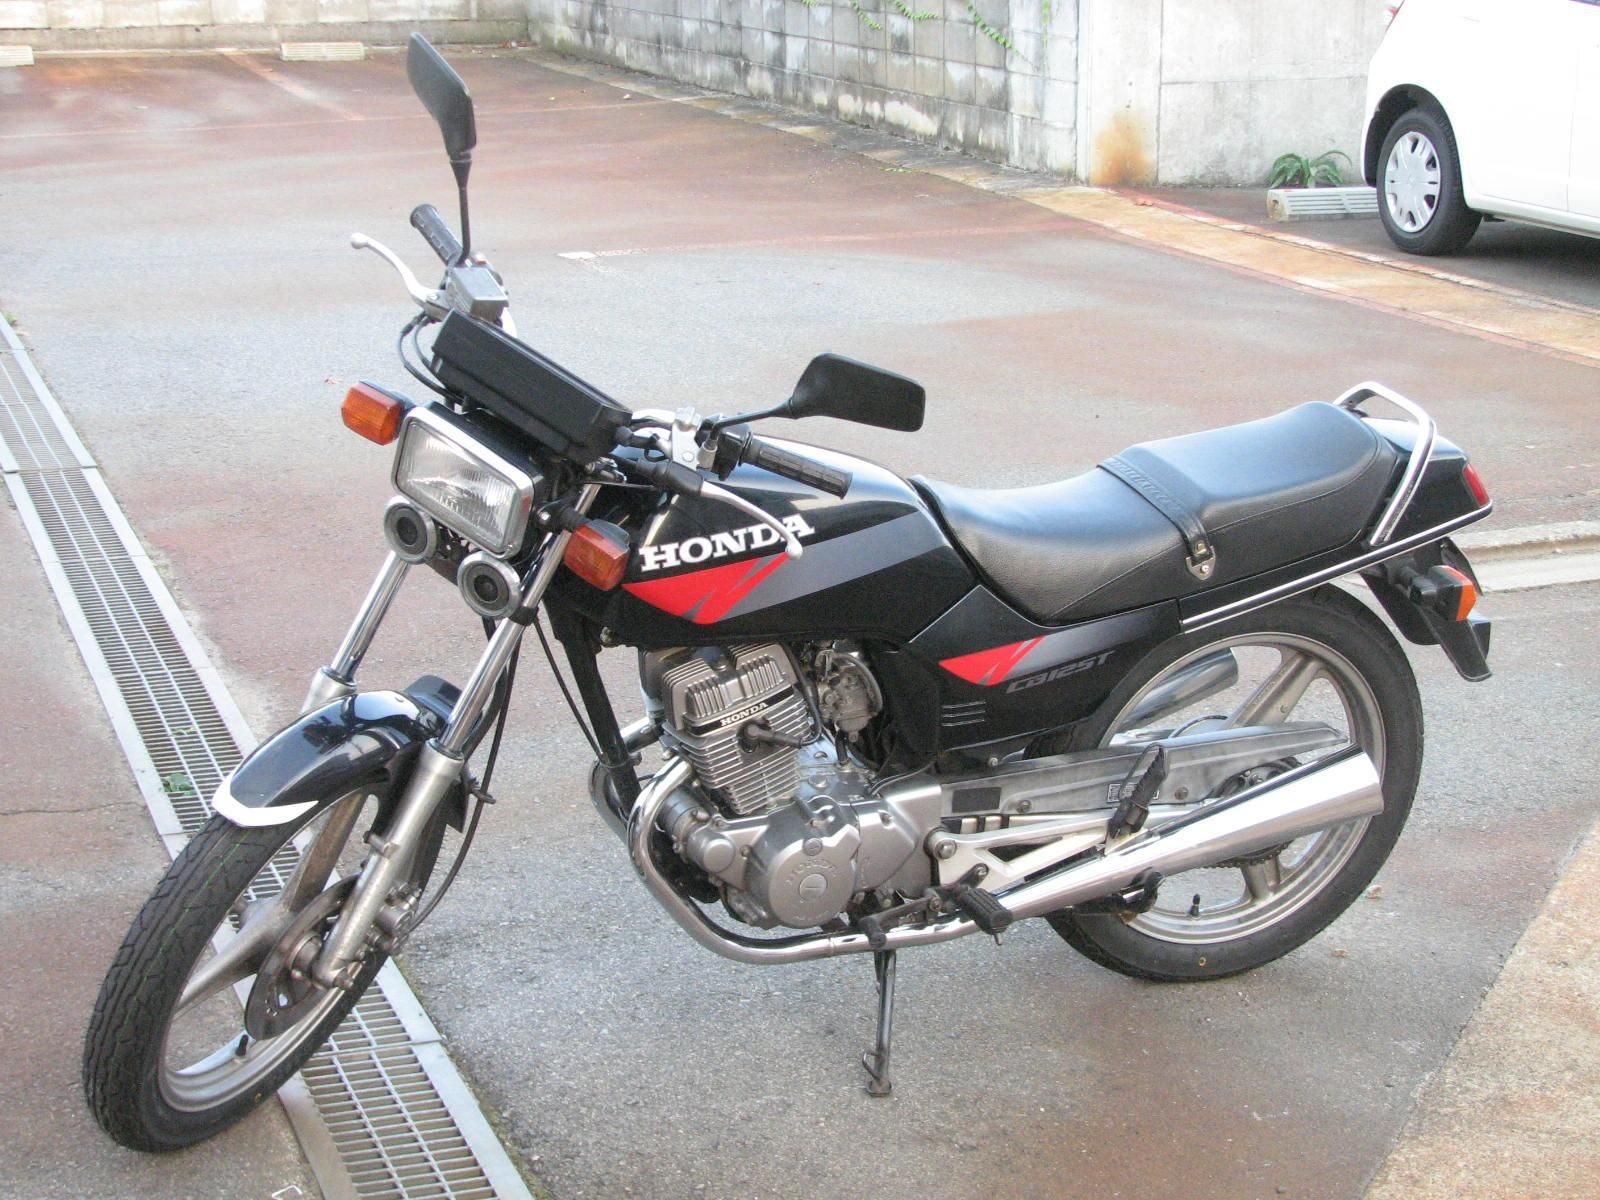 Honda CB125T - the one I learned on was not this nice